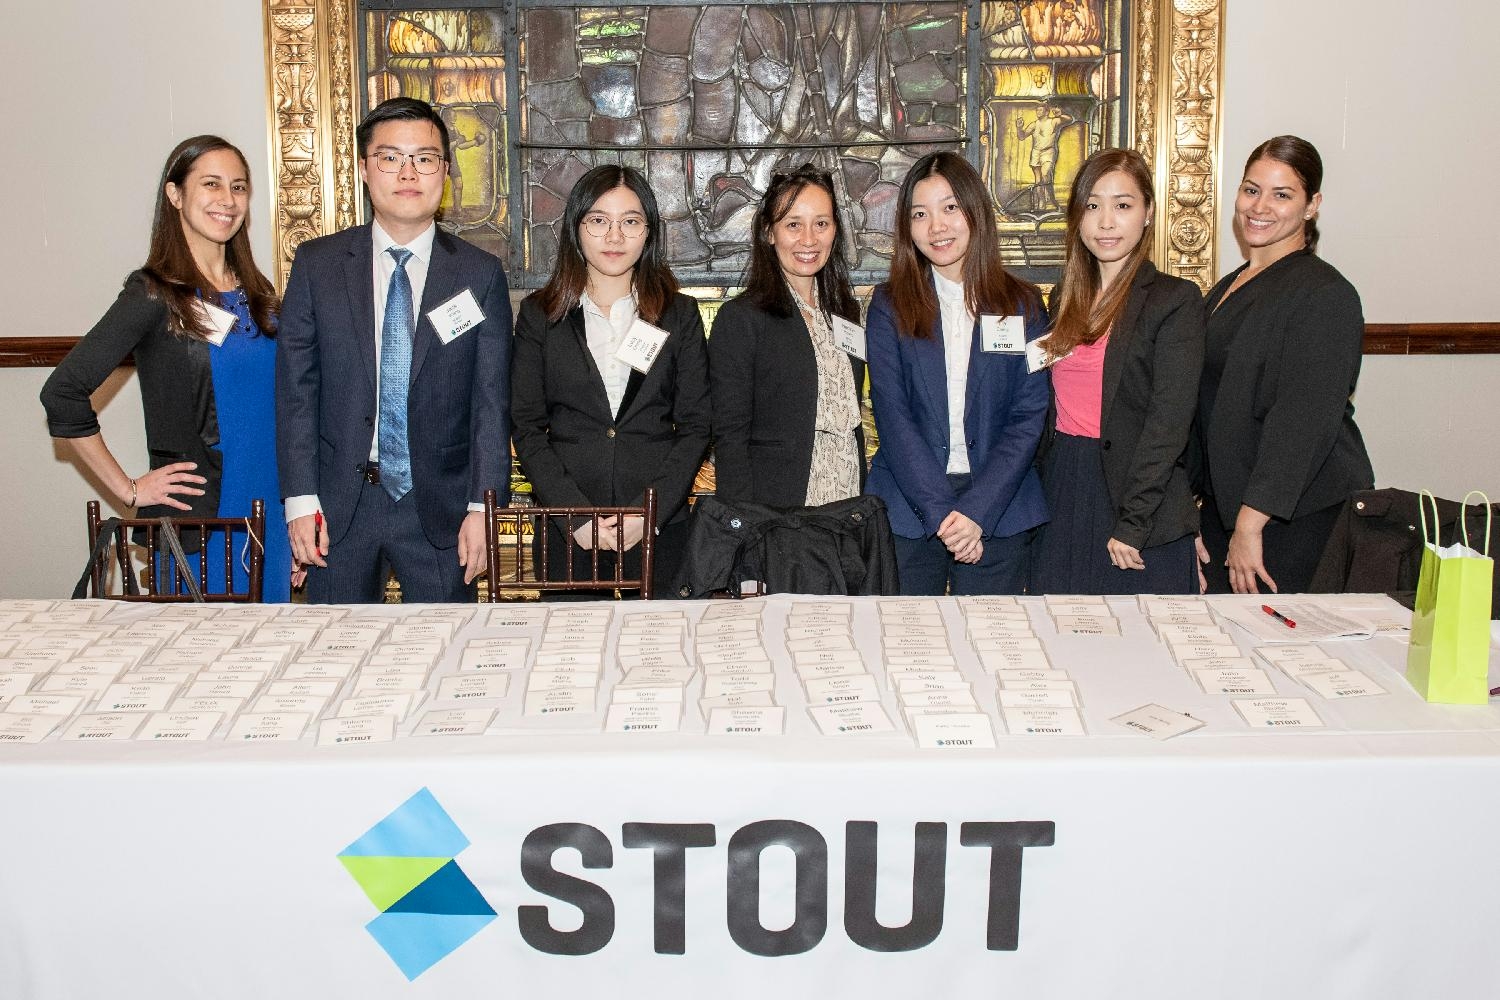 Stout Staff at the Portfolio Valuation Summit in NYC.